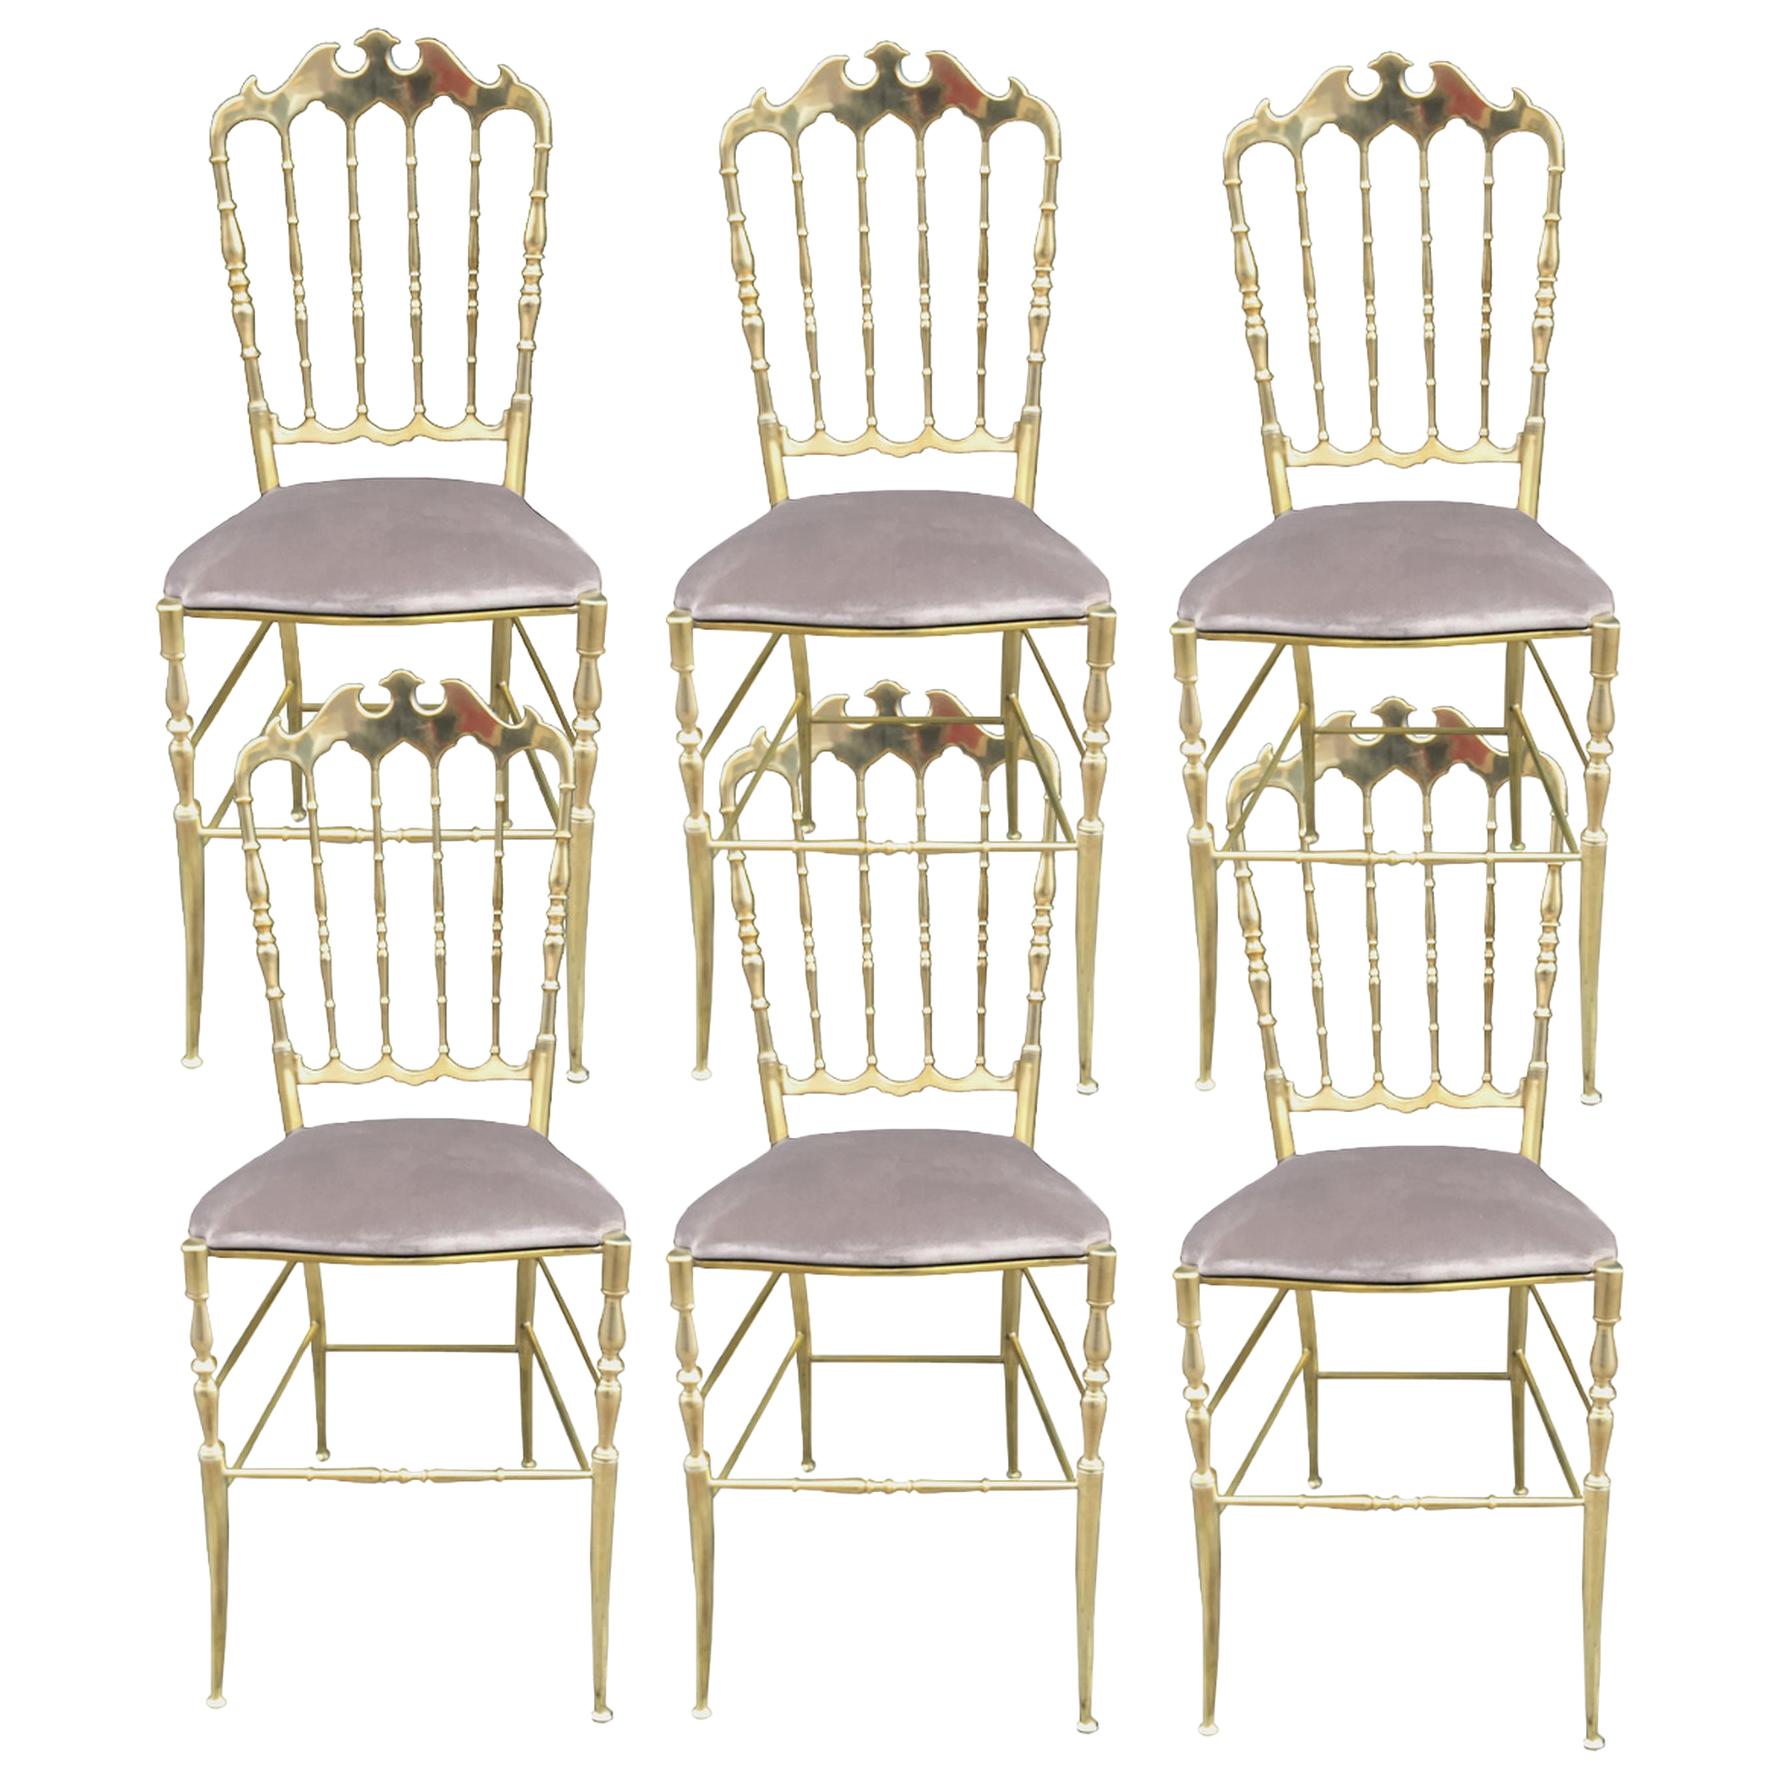 Set of Six Chairs in Turned and Polished Brass, Chiavari, Italy, circa 1960 For Sale